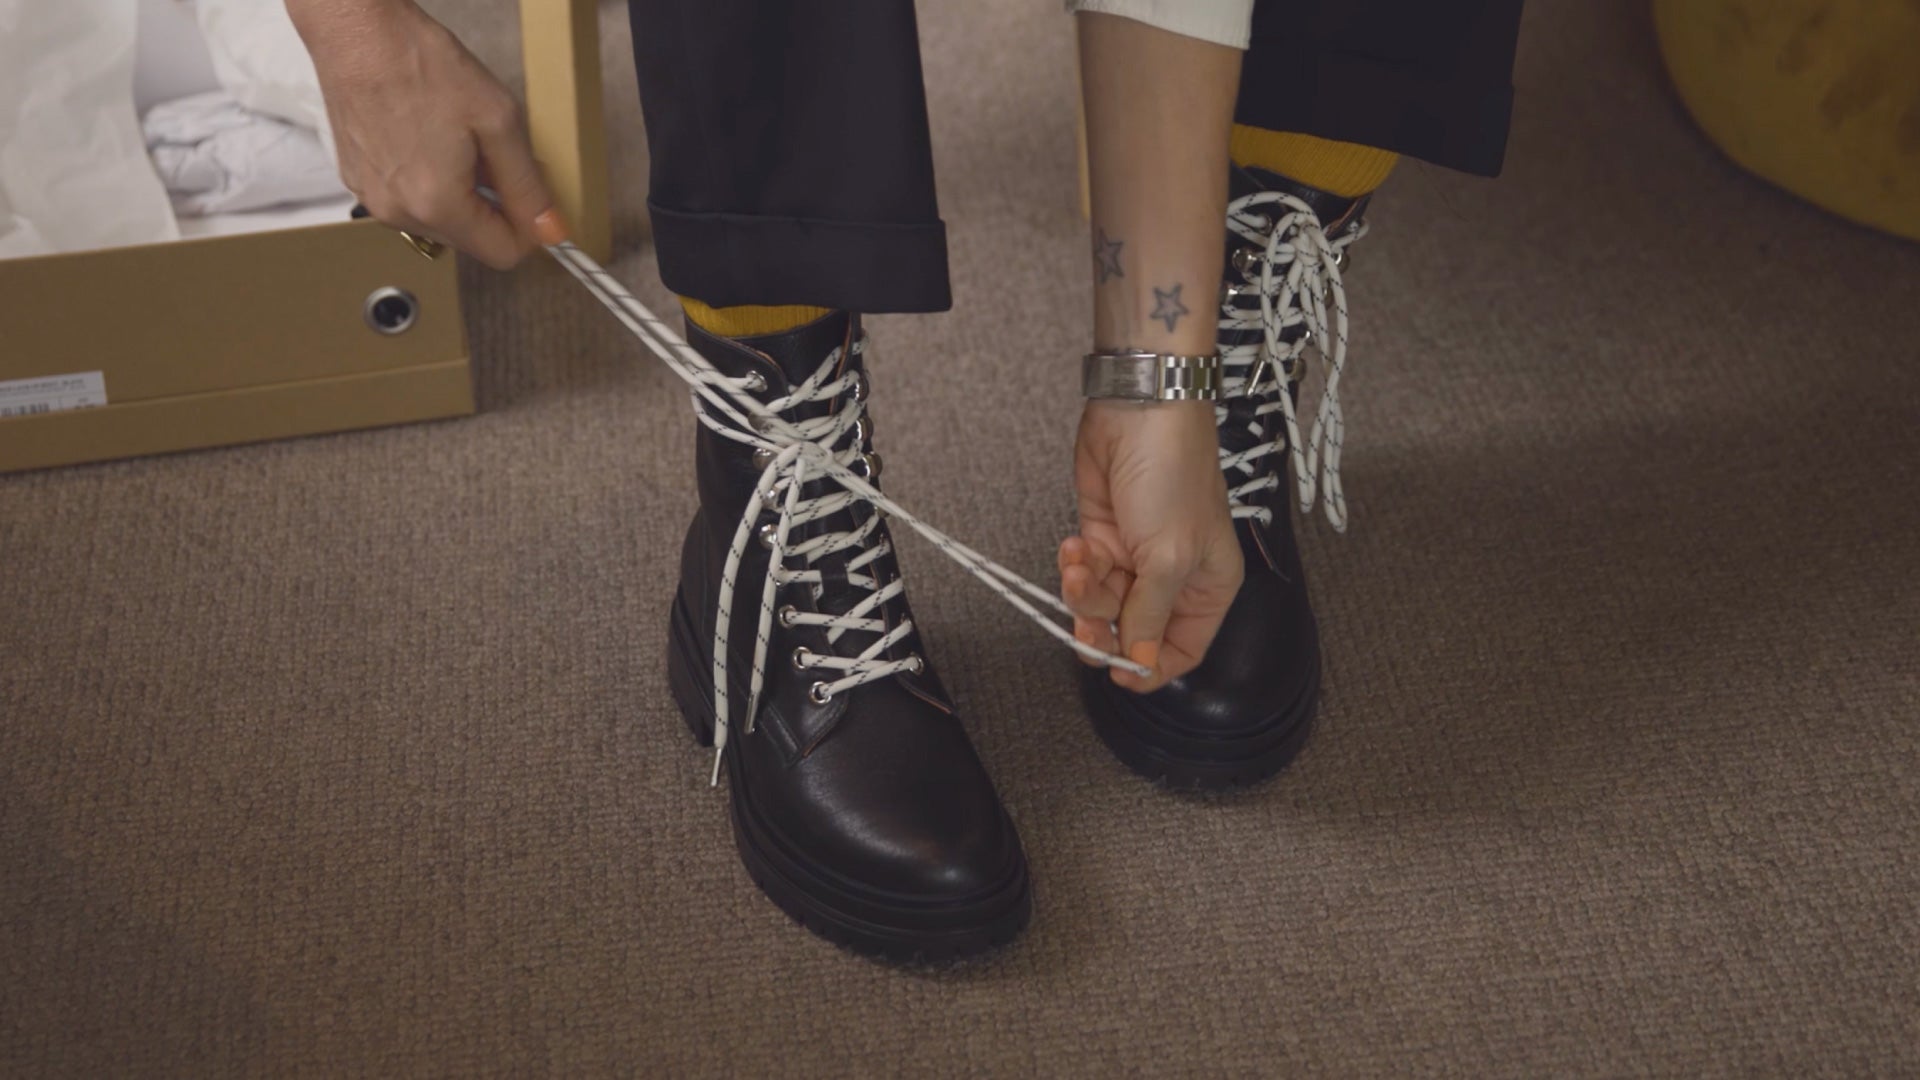 Our Peace Combat Boots: Are They Tricky To Lace Up?